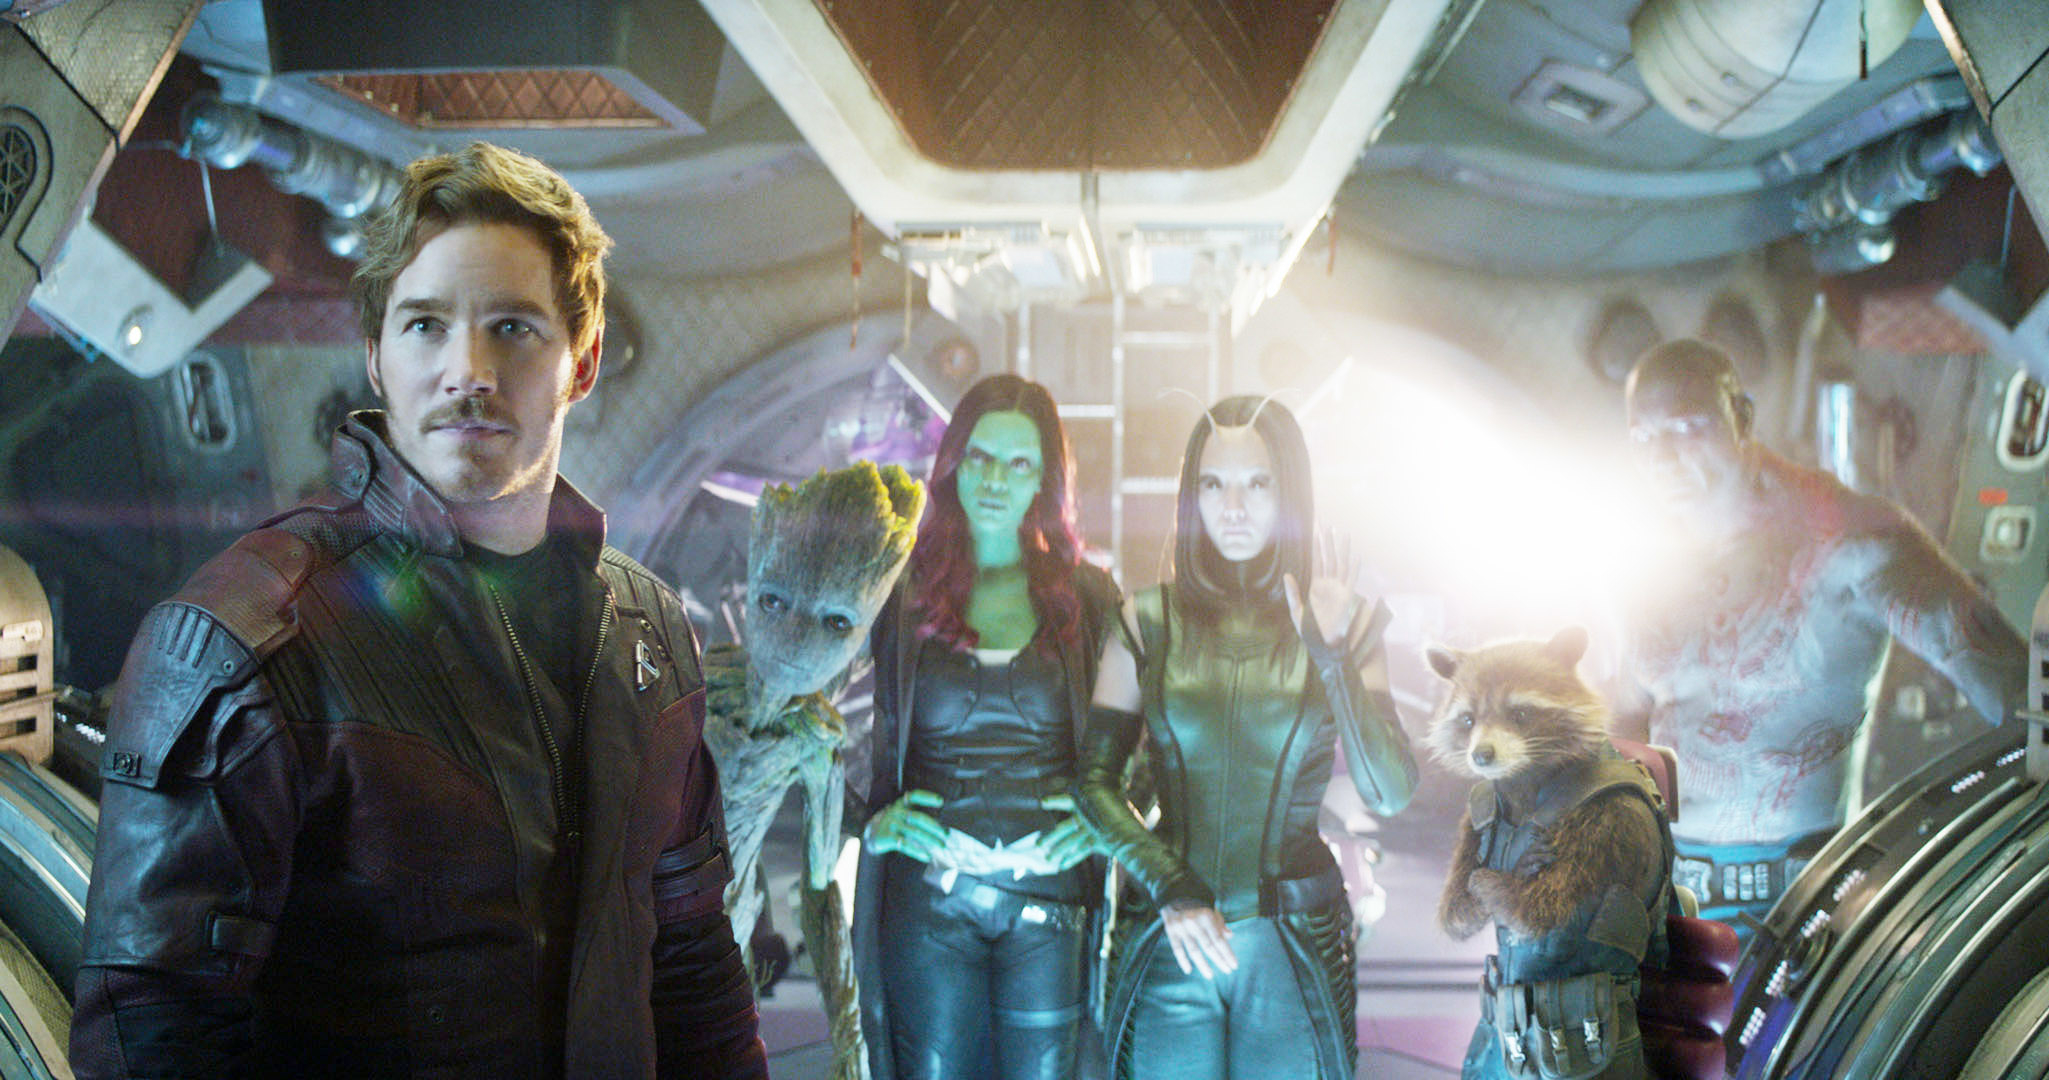 Star-Lord, Gamora, Groot, Drax, and Rocket standing in the Milano spaceship from Guardians of the Galaxy